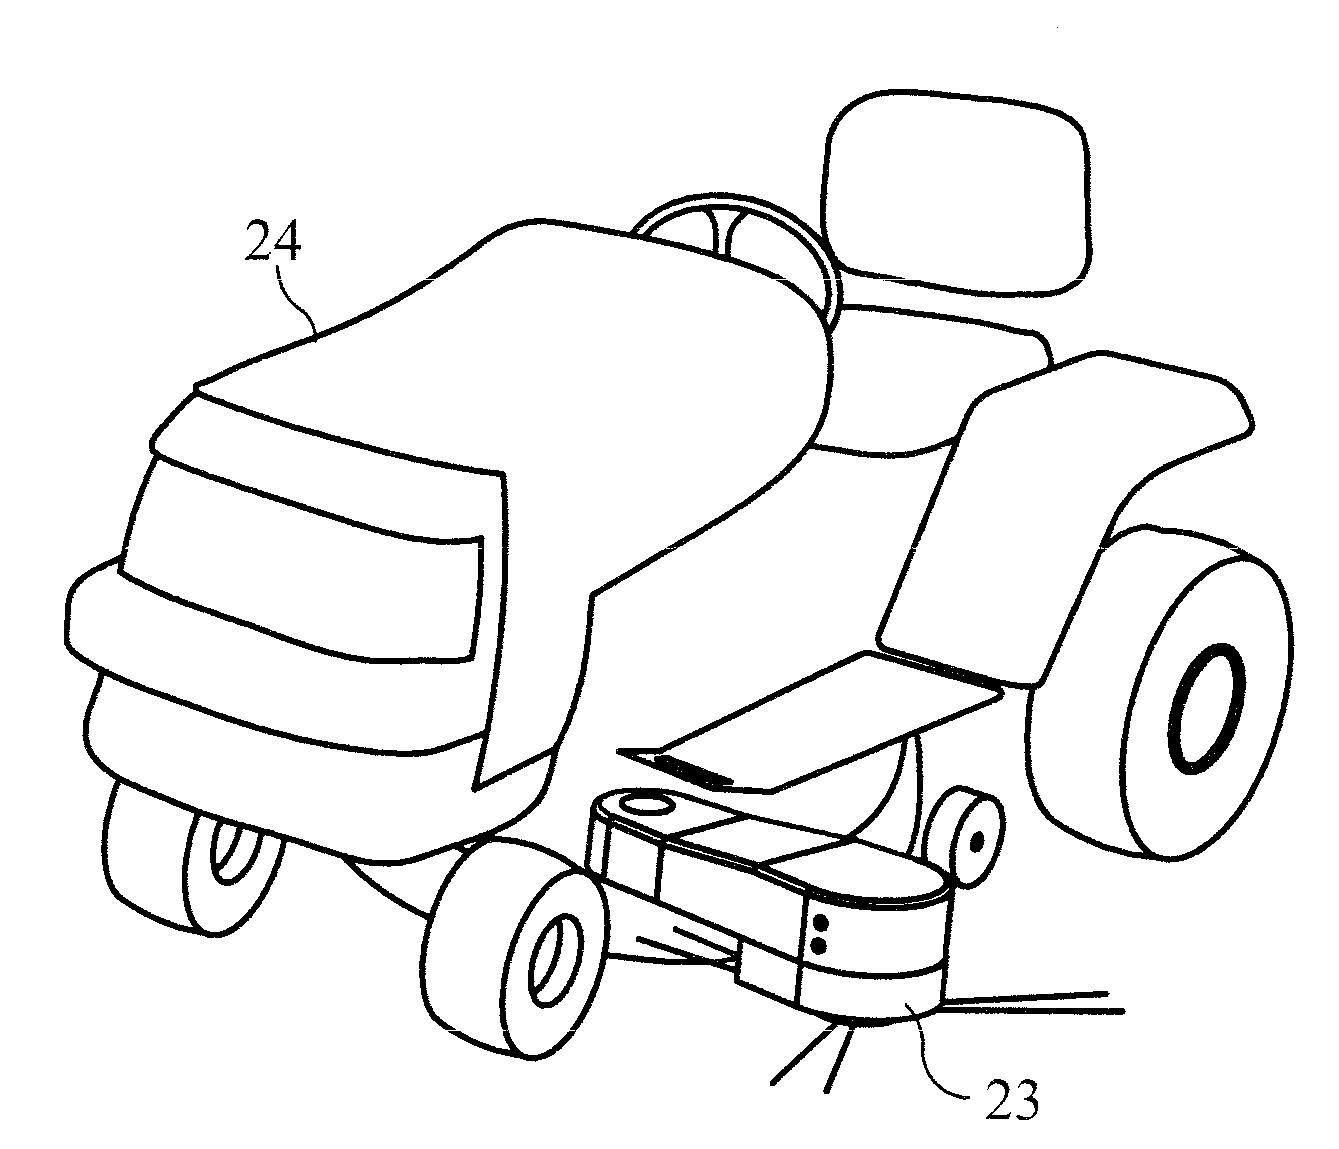 Adjustable sidekick trimmer device mounted on a tractor or a like vehicle for trimming the edges of a lawn